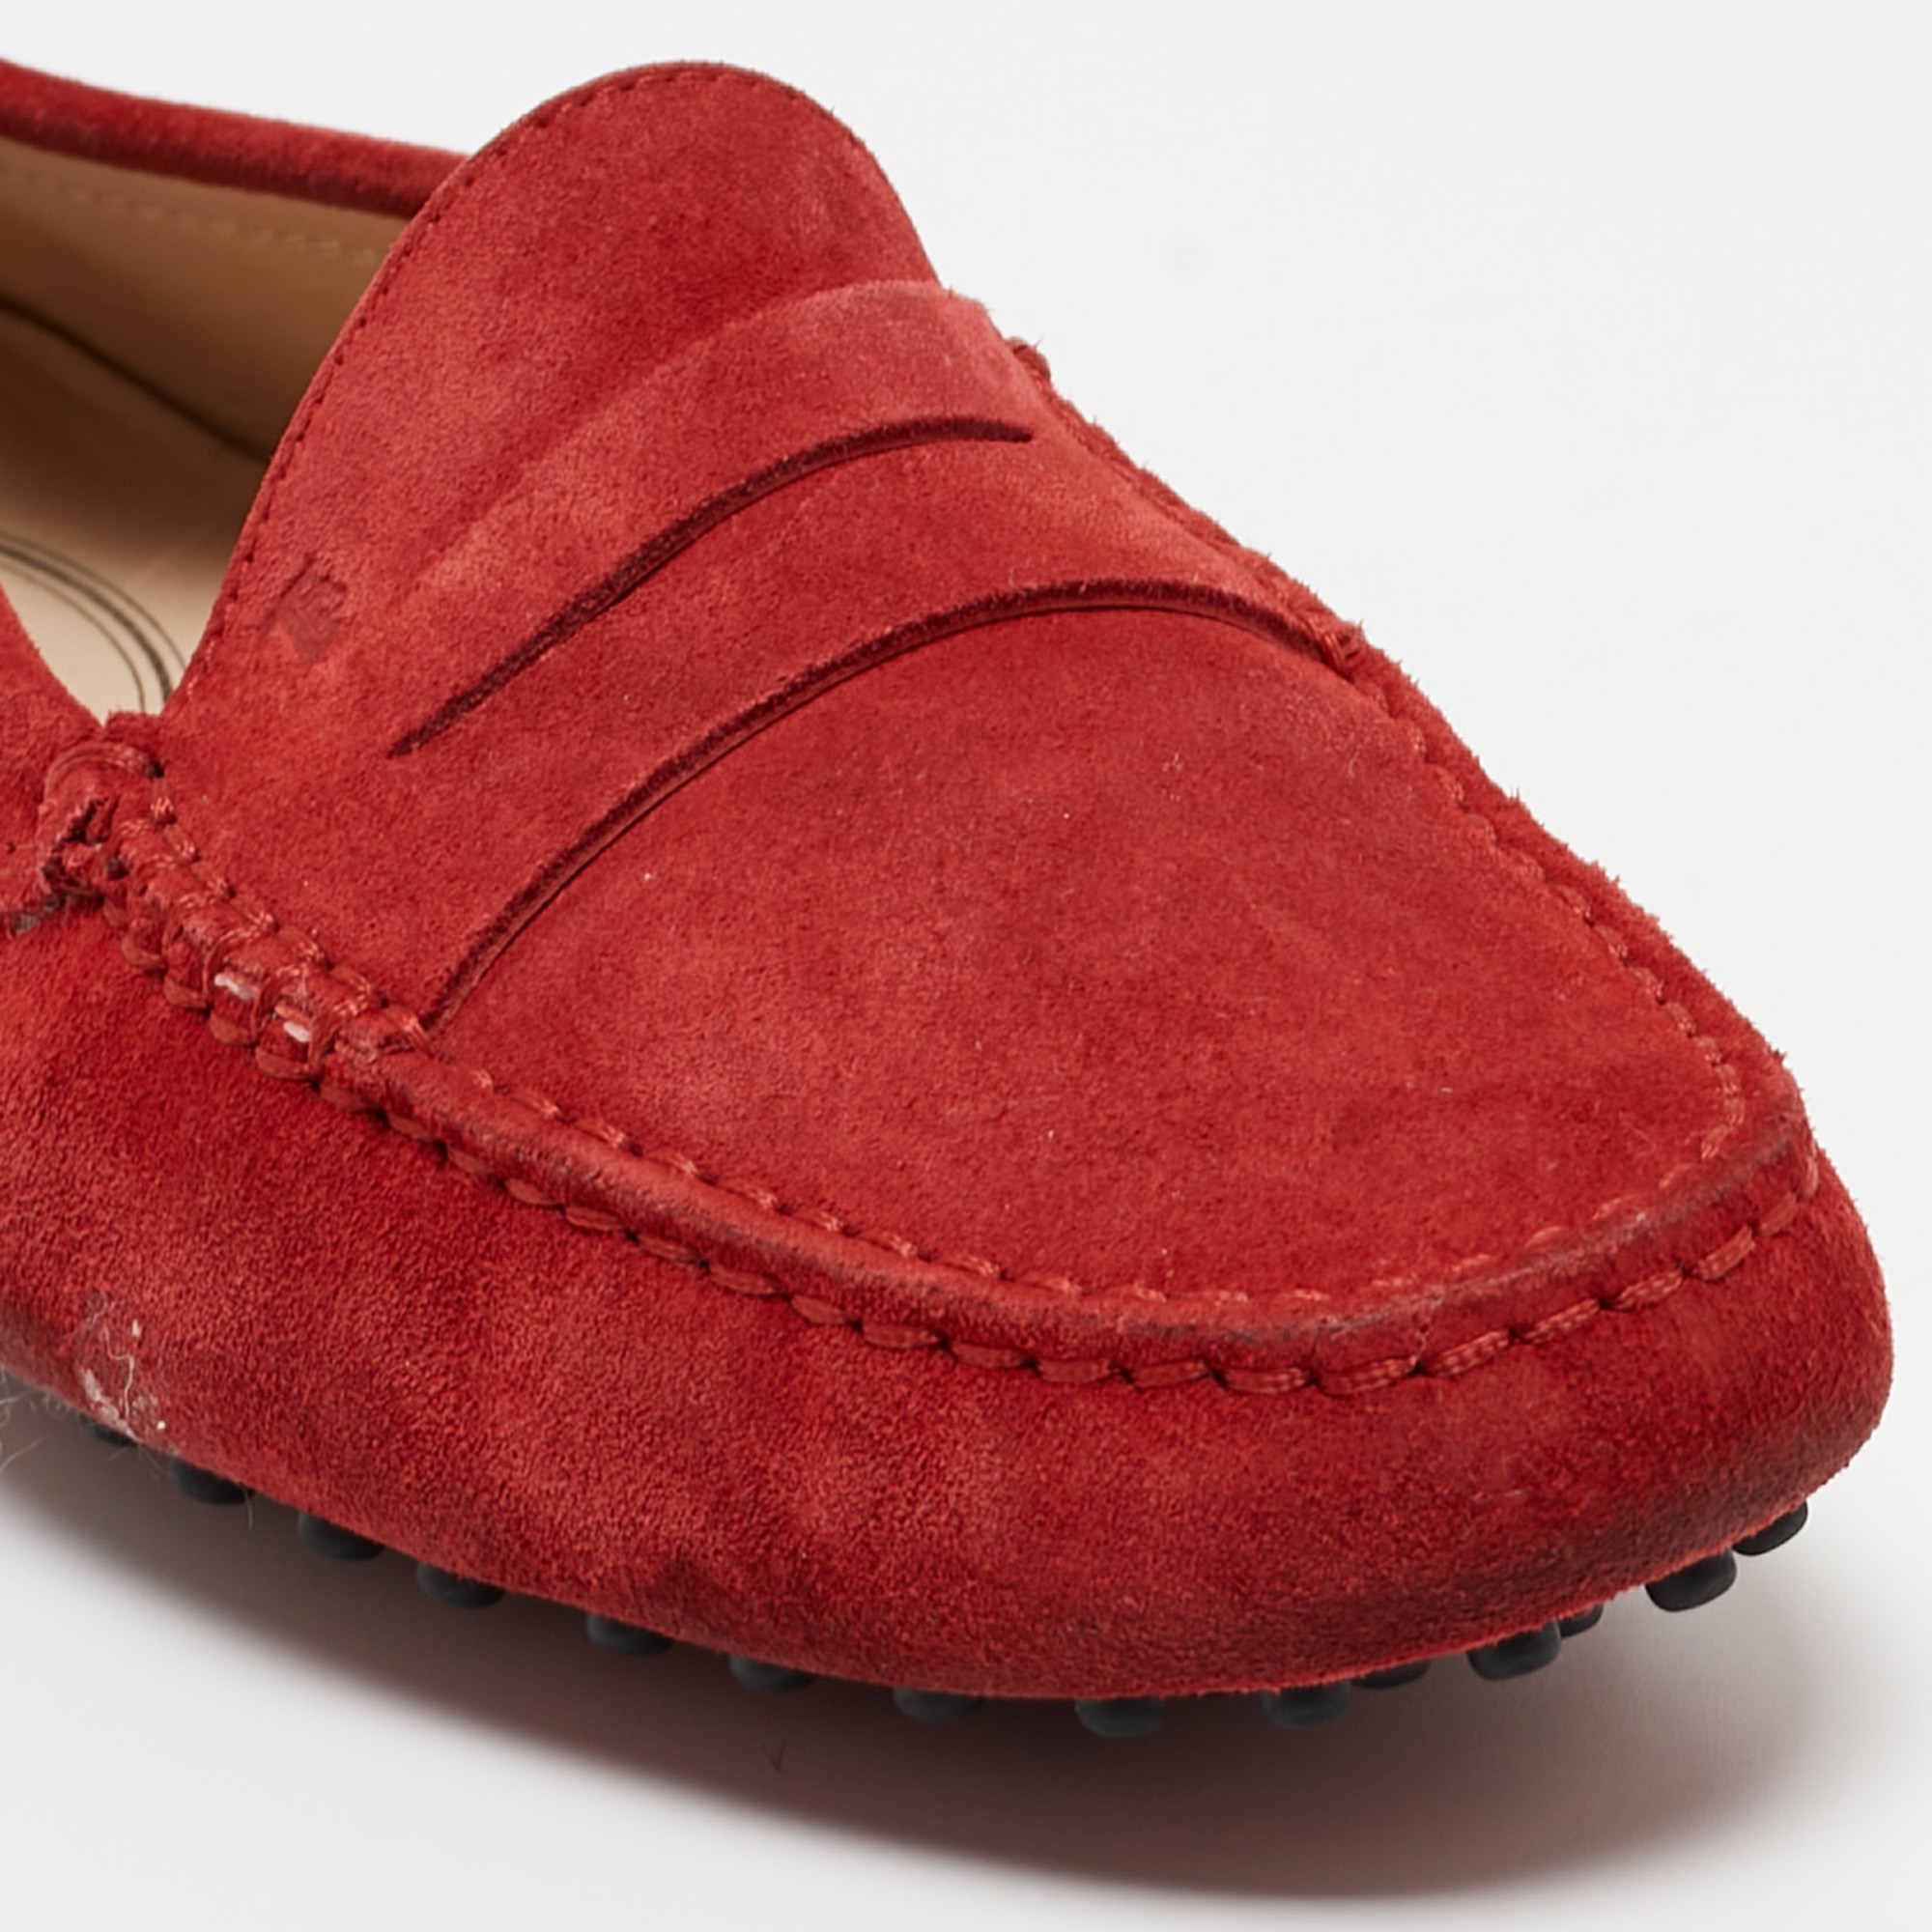 Tod's Red Suede Penny Loafers Size 39.5